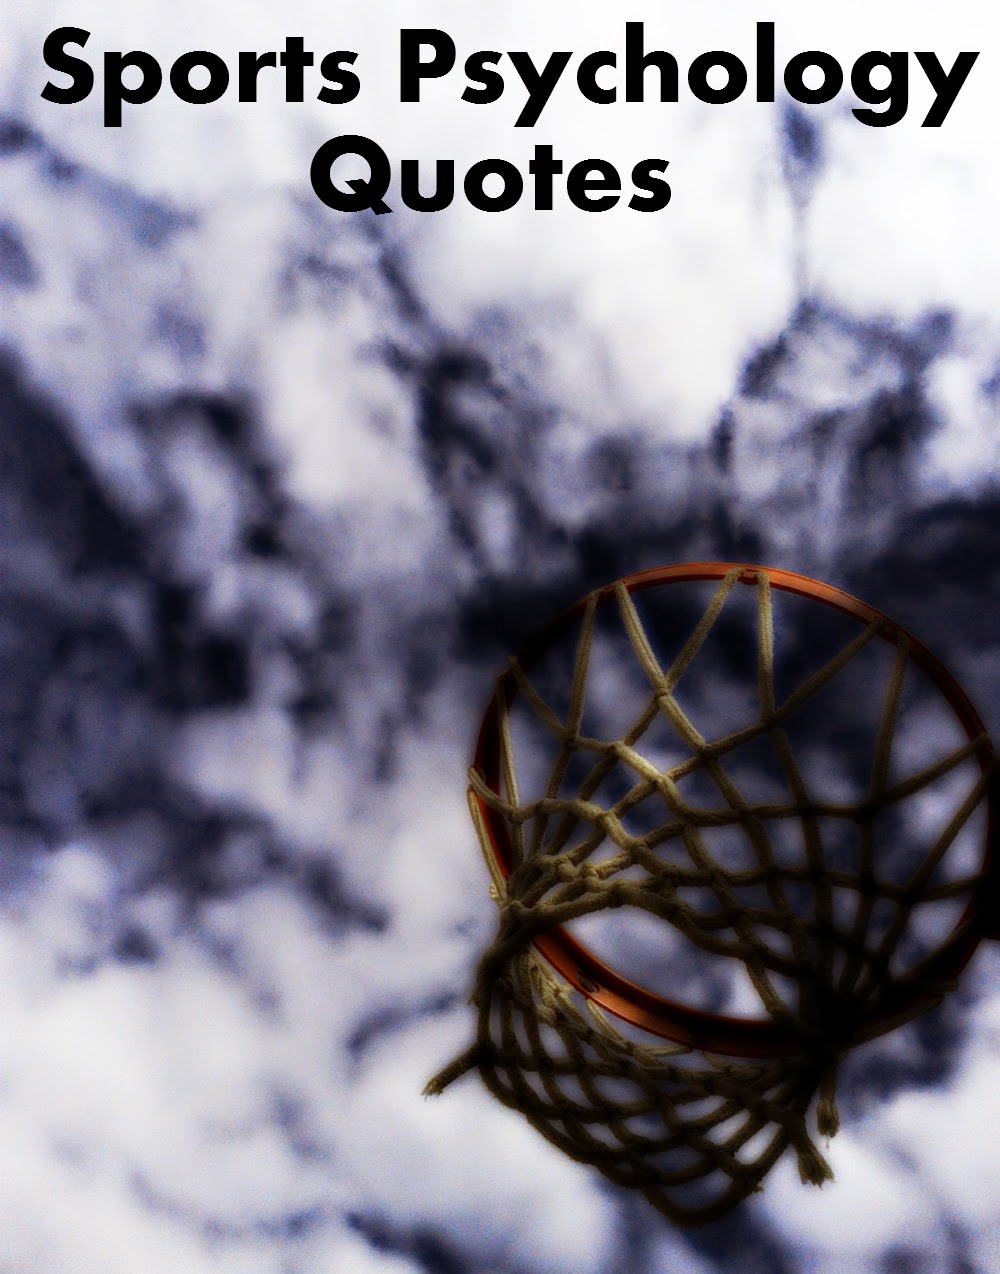 Sports and Performance Psychology Quotes